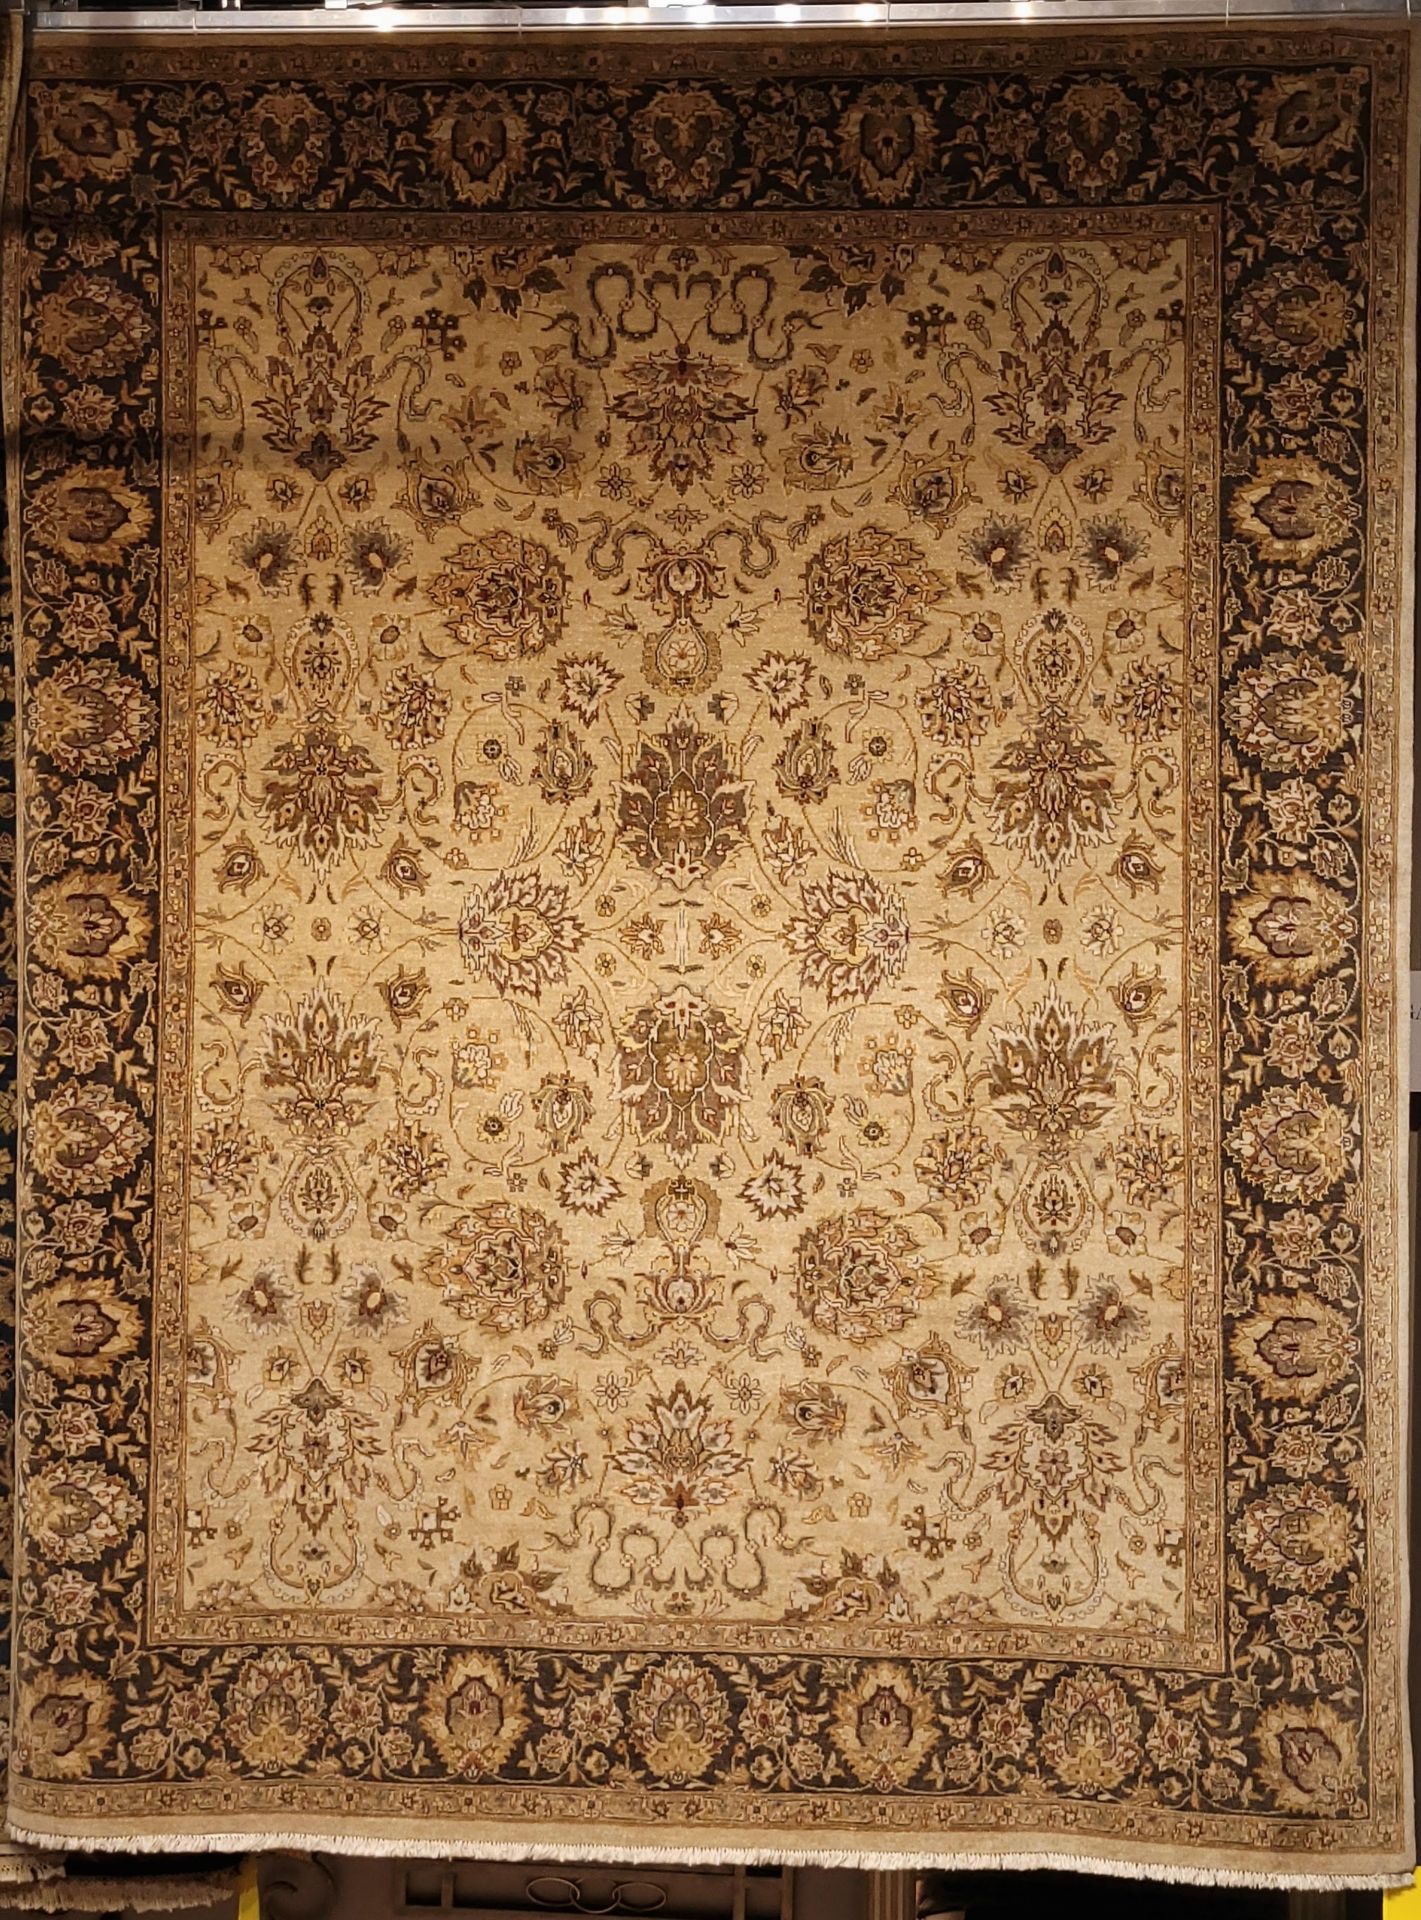 8' X 10' FINE WOOL PILE HAND KNOTTED IN INDIA - MSRP $10,787.00 (LOCATED IN GALLERY TWO) INVENTORY